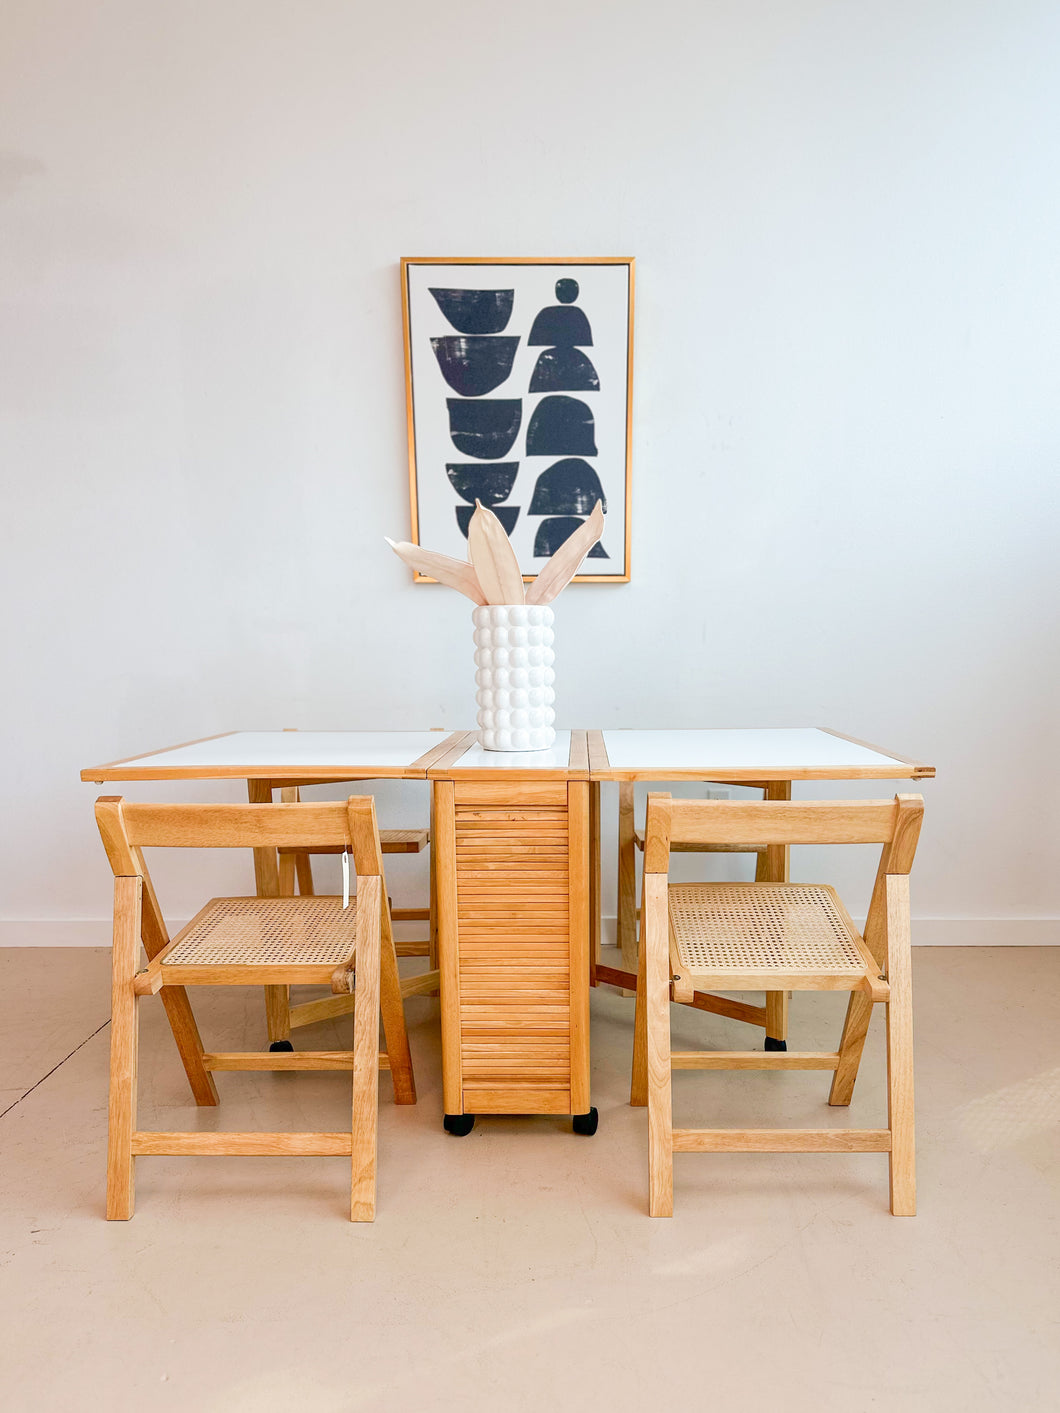 Modular Table and Cane Chairs